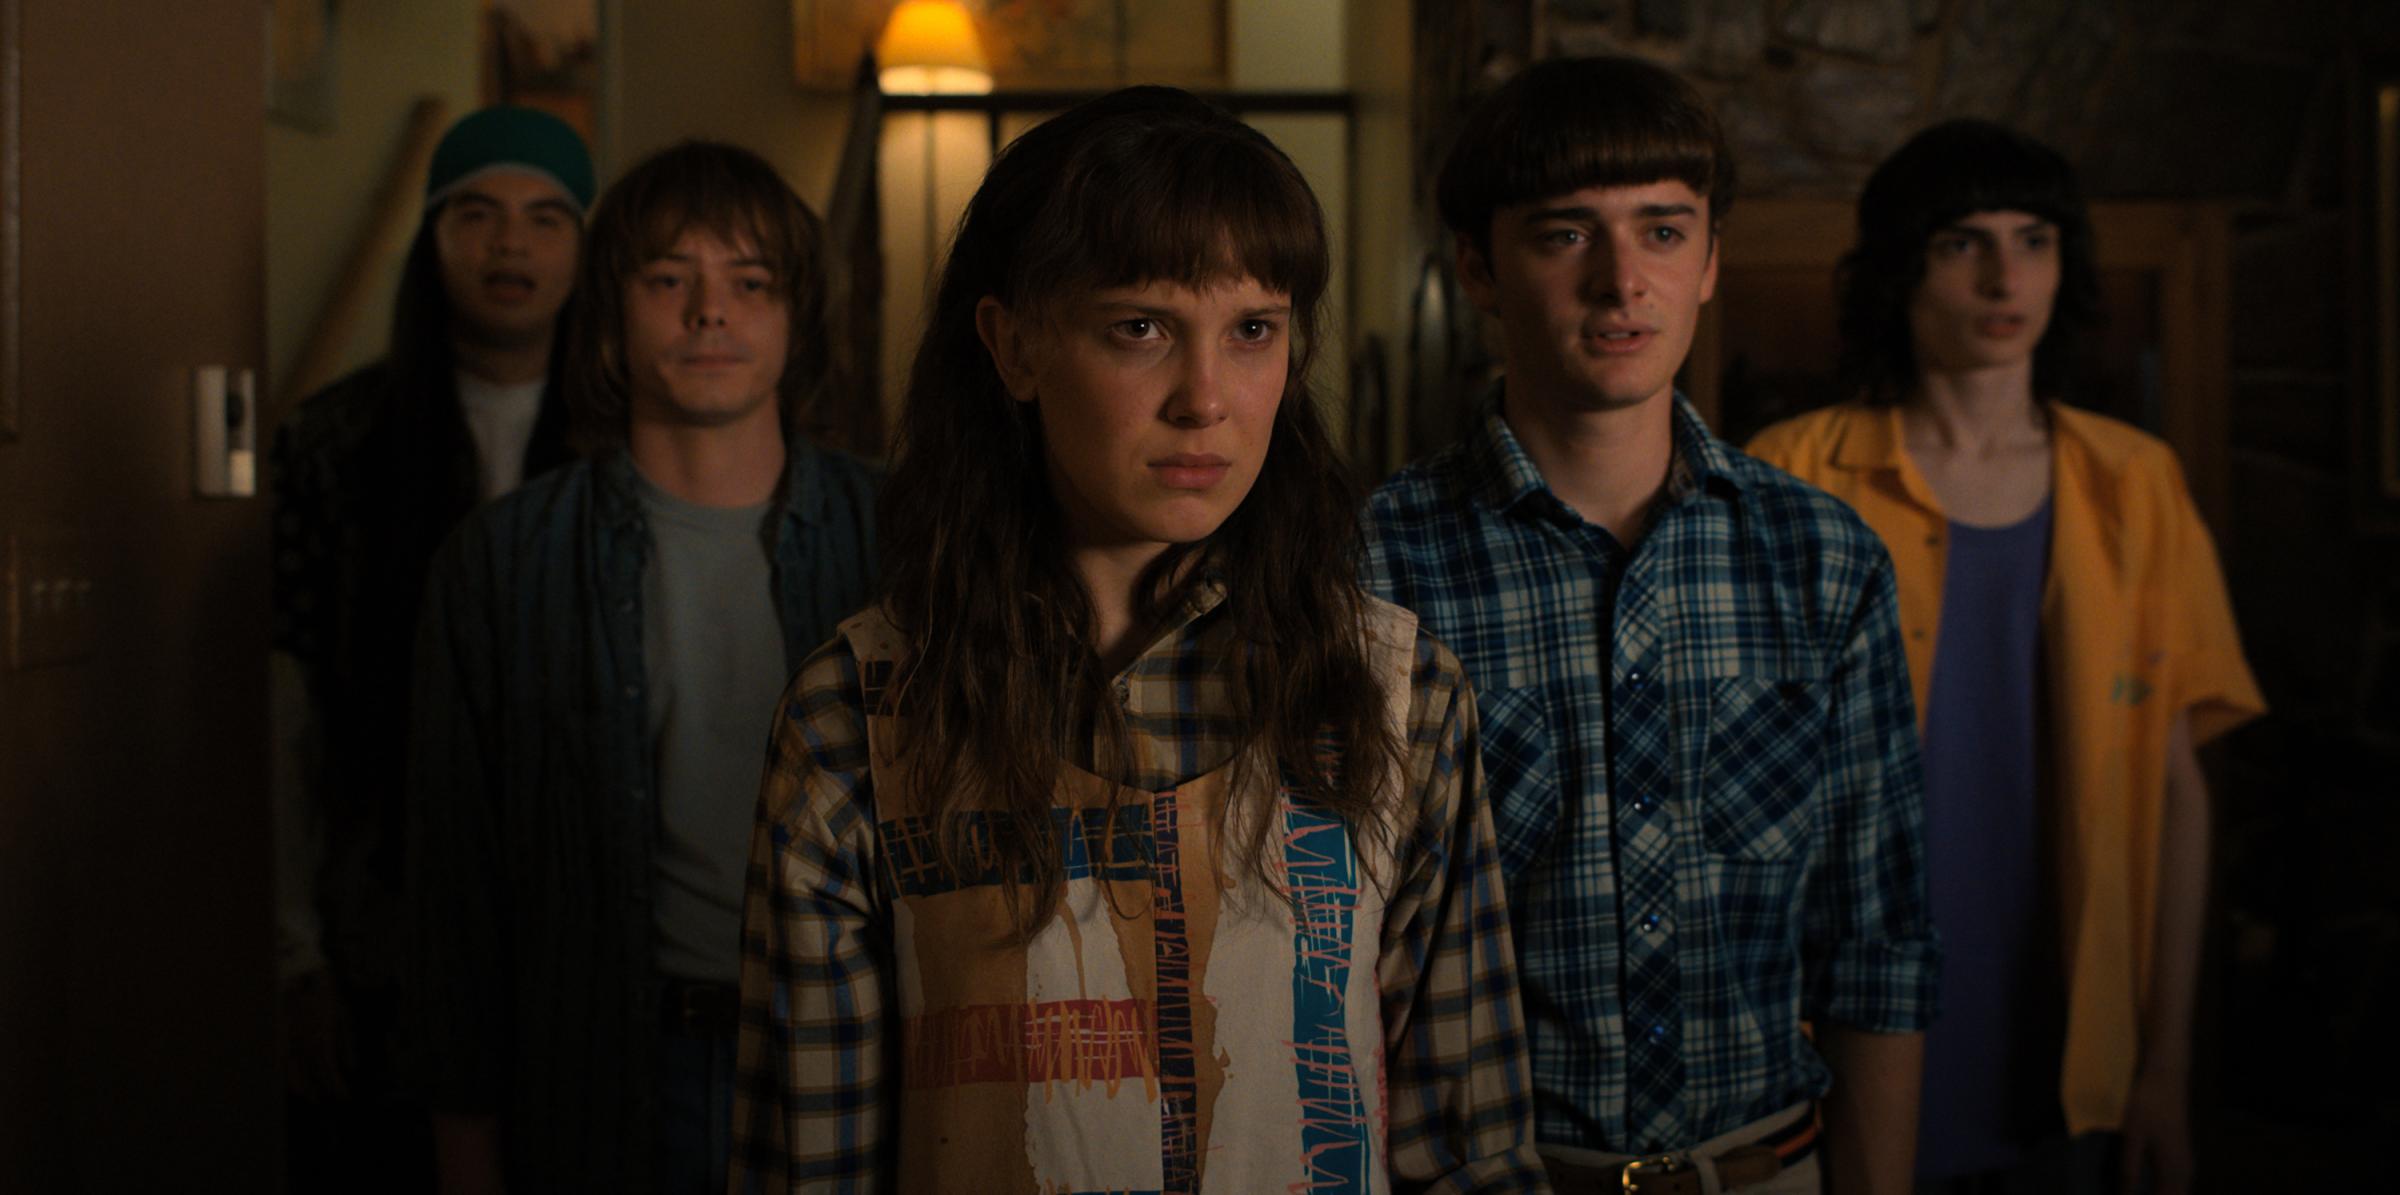 Still undated TV releases of Stranger Things - Season 4 Volume 1. Pictured: Eduardo Franco as Argyle, Charlie Heaton as Jonathan, Millie Bobby Brown as Eleven, Noah Schnapp as Will Byers, Finn Wolfhard as Mike Wheeler.  PA SHOWBIZ DOWNLOAD